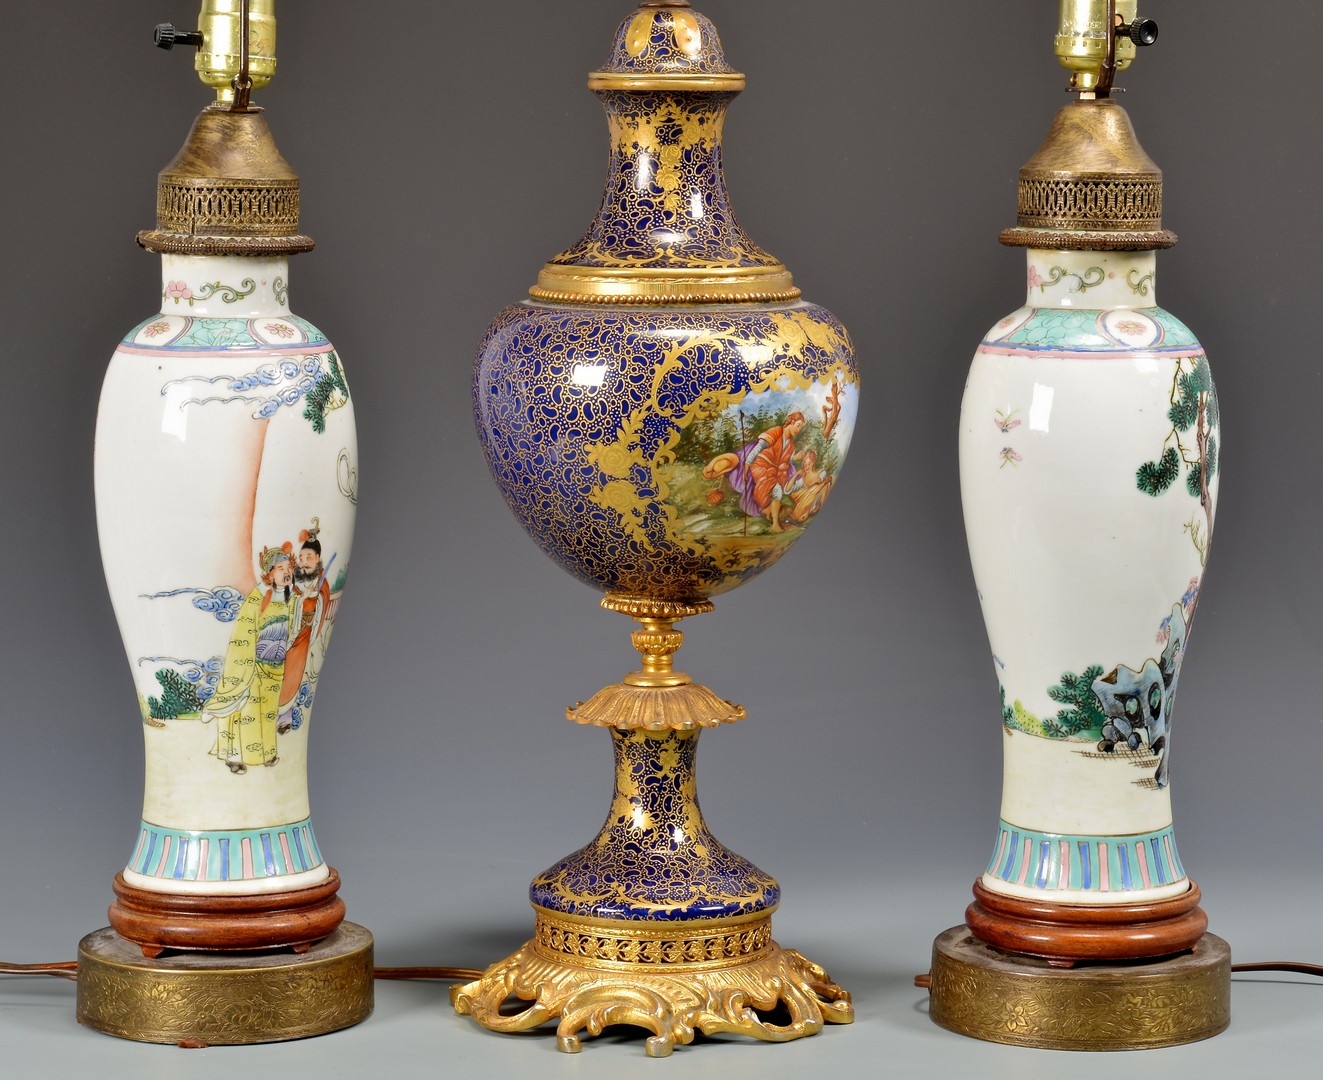 Lot 617: 3 Lamps, Chinese and French